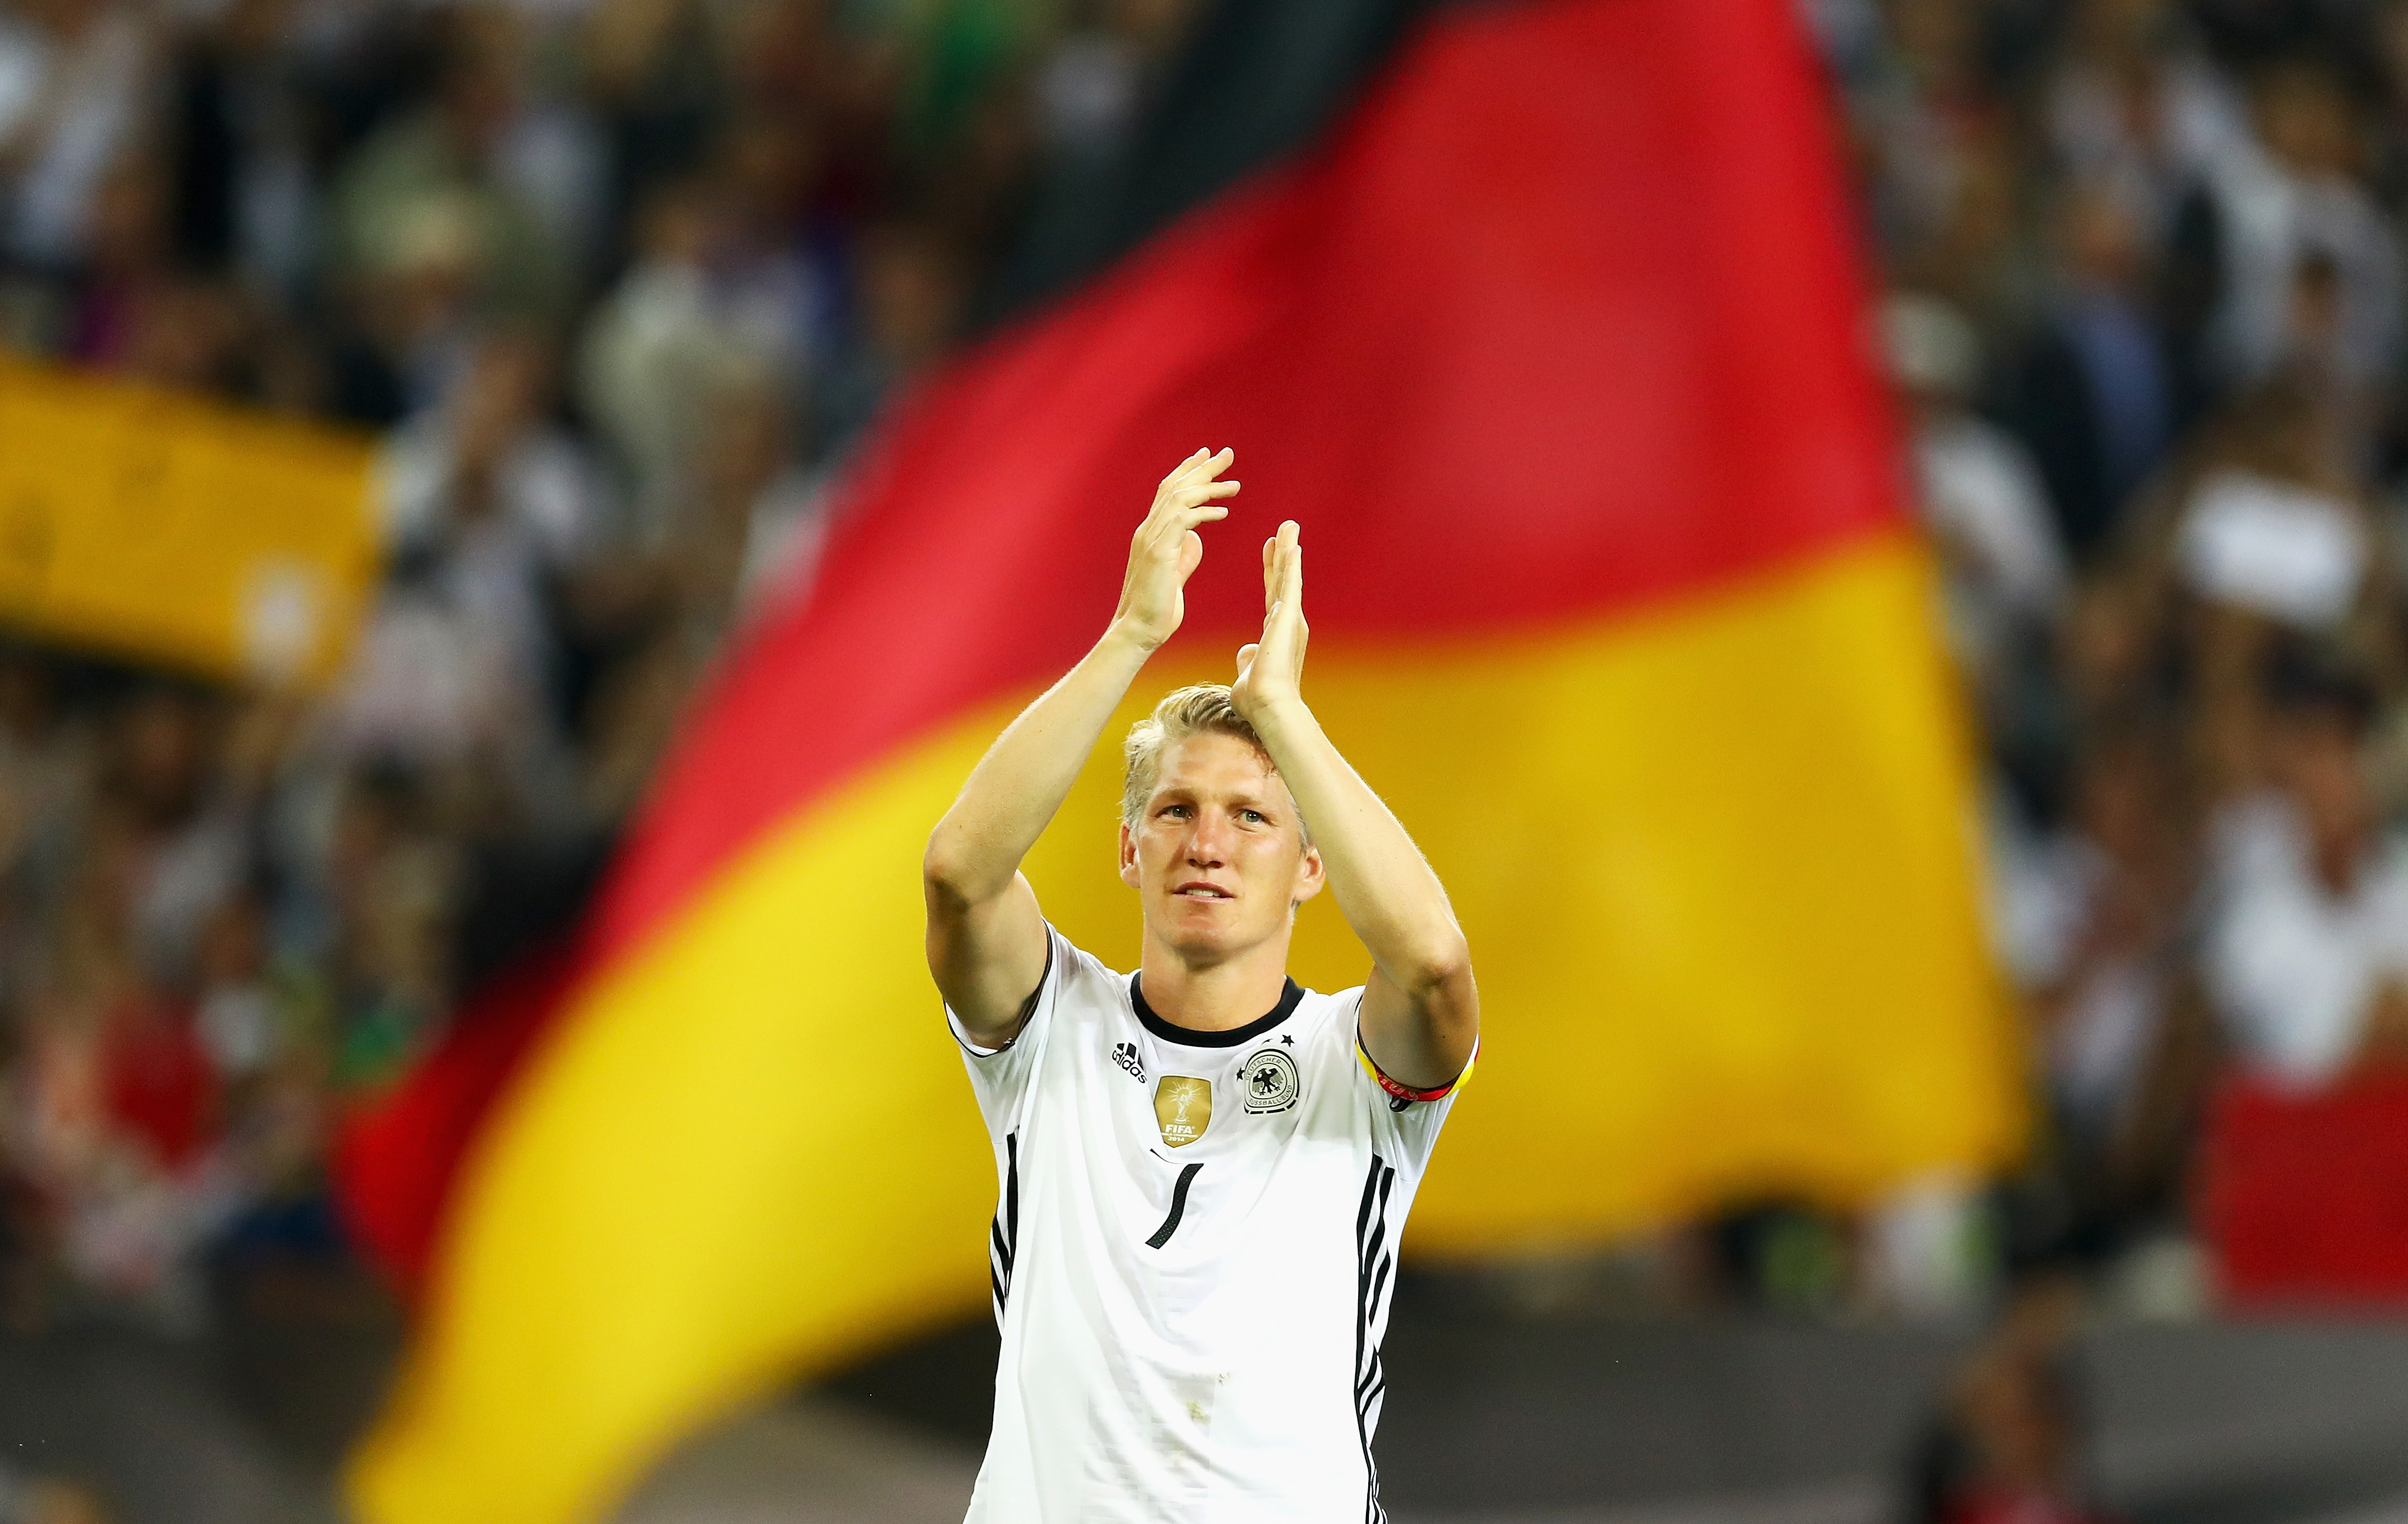 MOENCHENGLADBACH, GERMANY - AUGUST 31:  Bastian Schweinsteiger of Germany acknowledges the crowd after his last international match during the International Friendly match between Germany and Finland at Borussia-Park on August 31, 2016 in Moenchengladbach, Germany.  (Photo by Lars Baron/Bongarts/Getty Images)